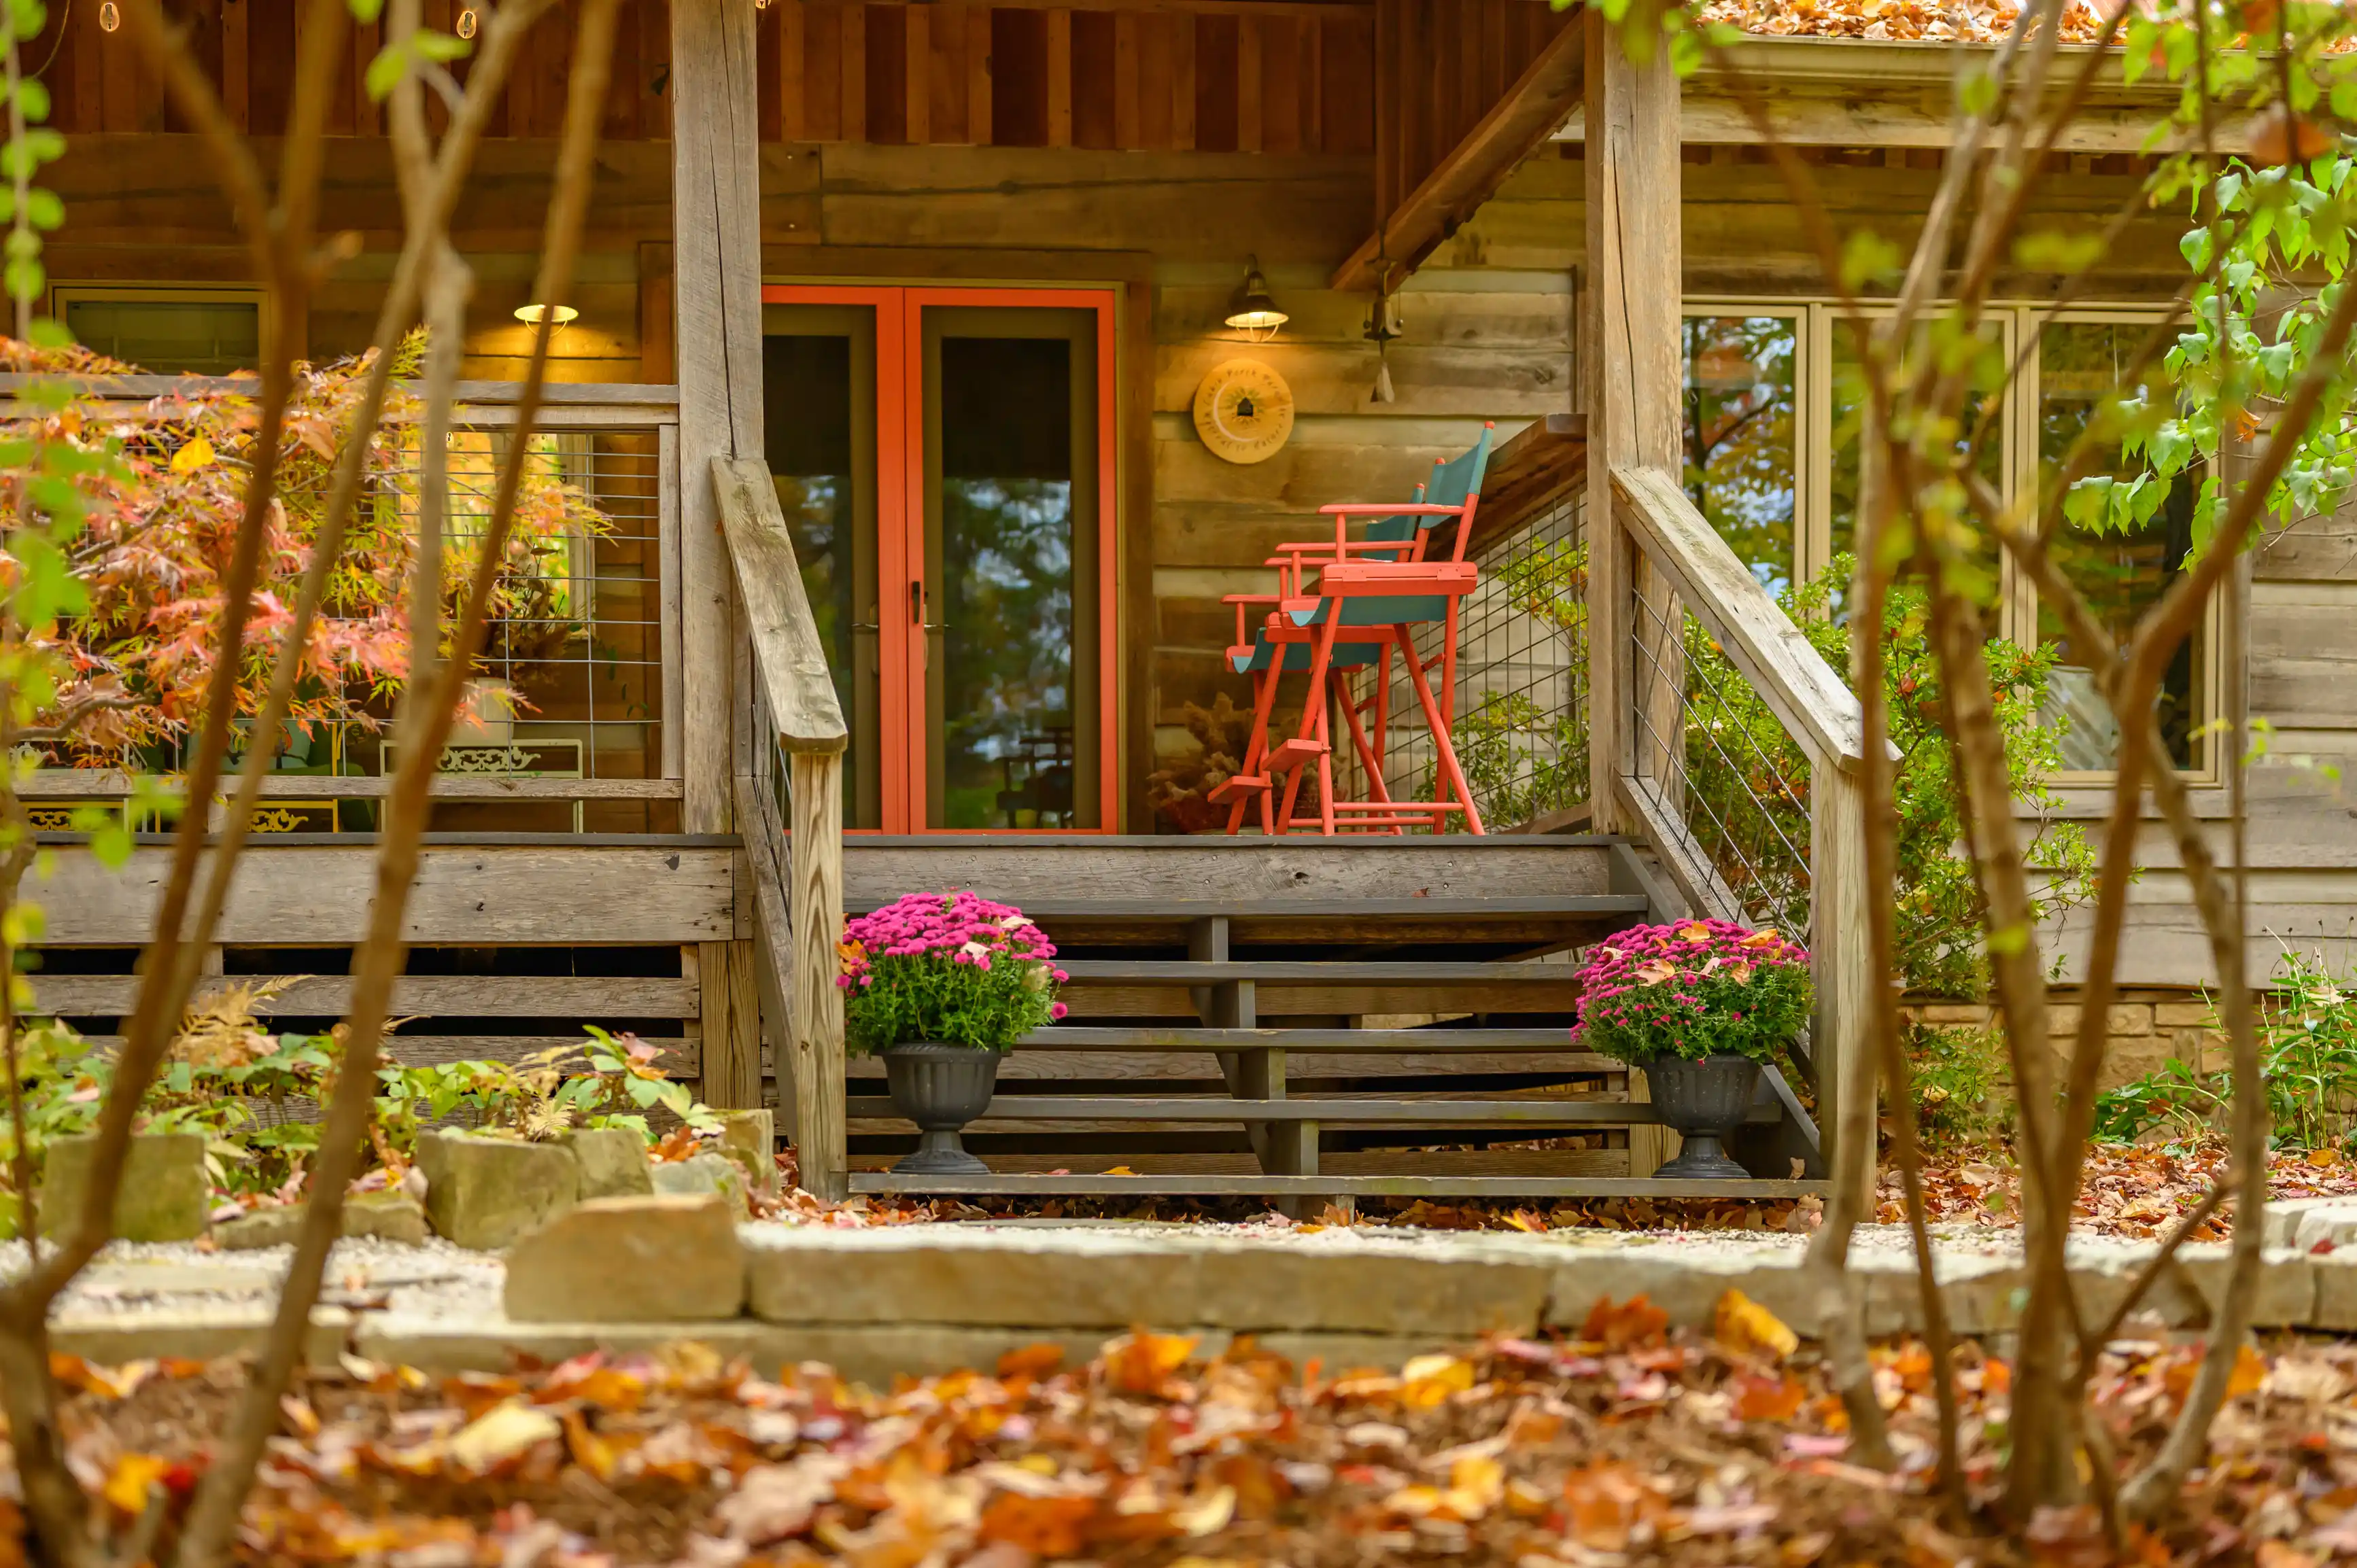 Cozy wooden cabin porch with orange double doors, red high chair, pink potted flowers, and fallen autumn leaves.